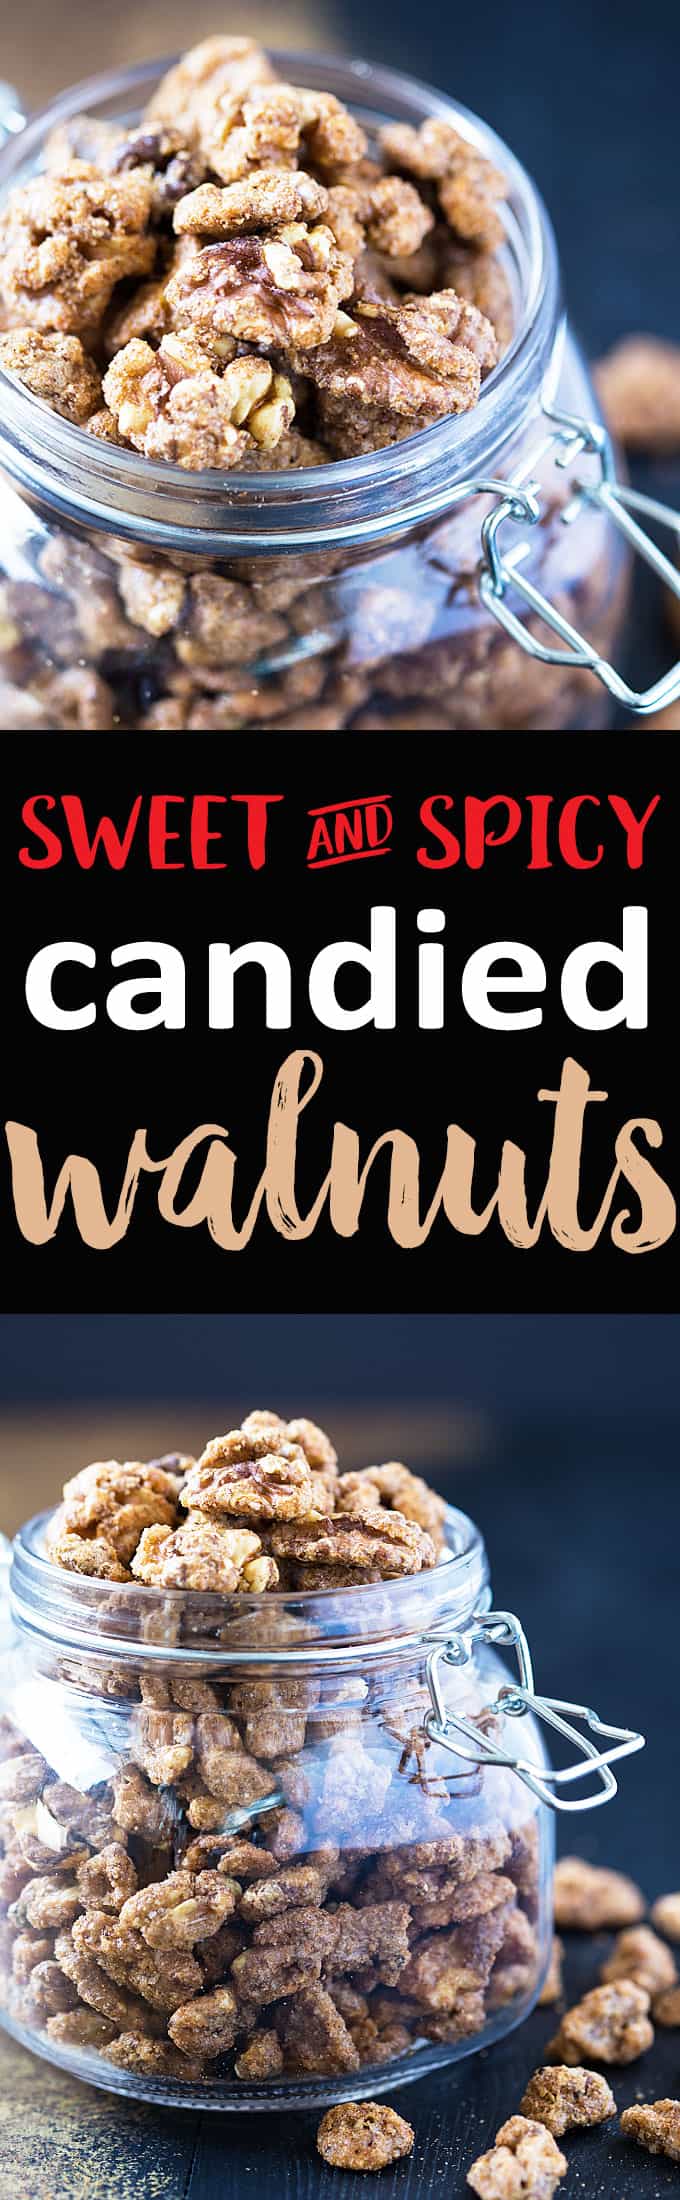 Two images of candied walnuts.  Text in center says sweet and spicy candied walnuts.